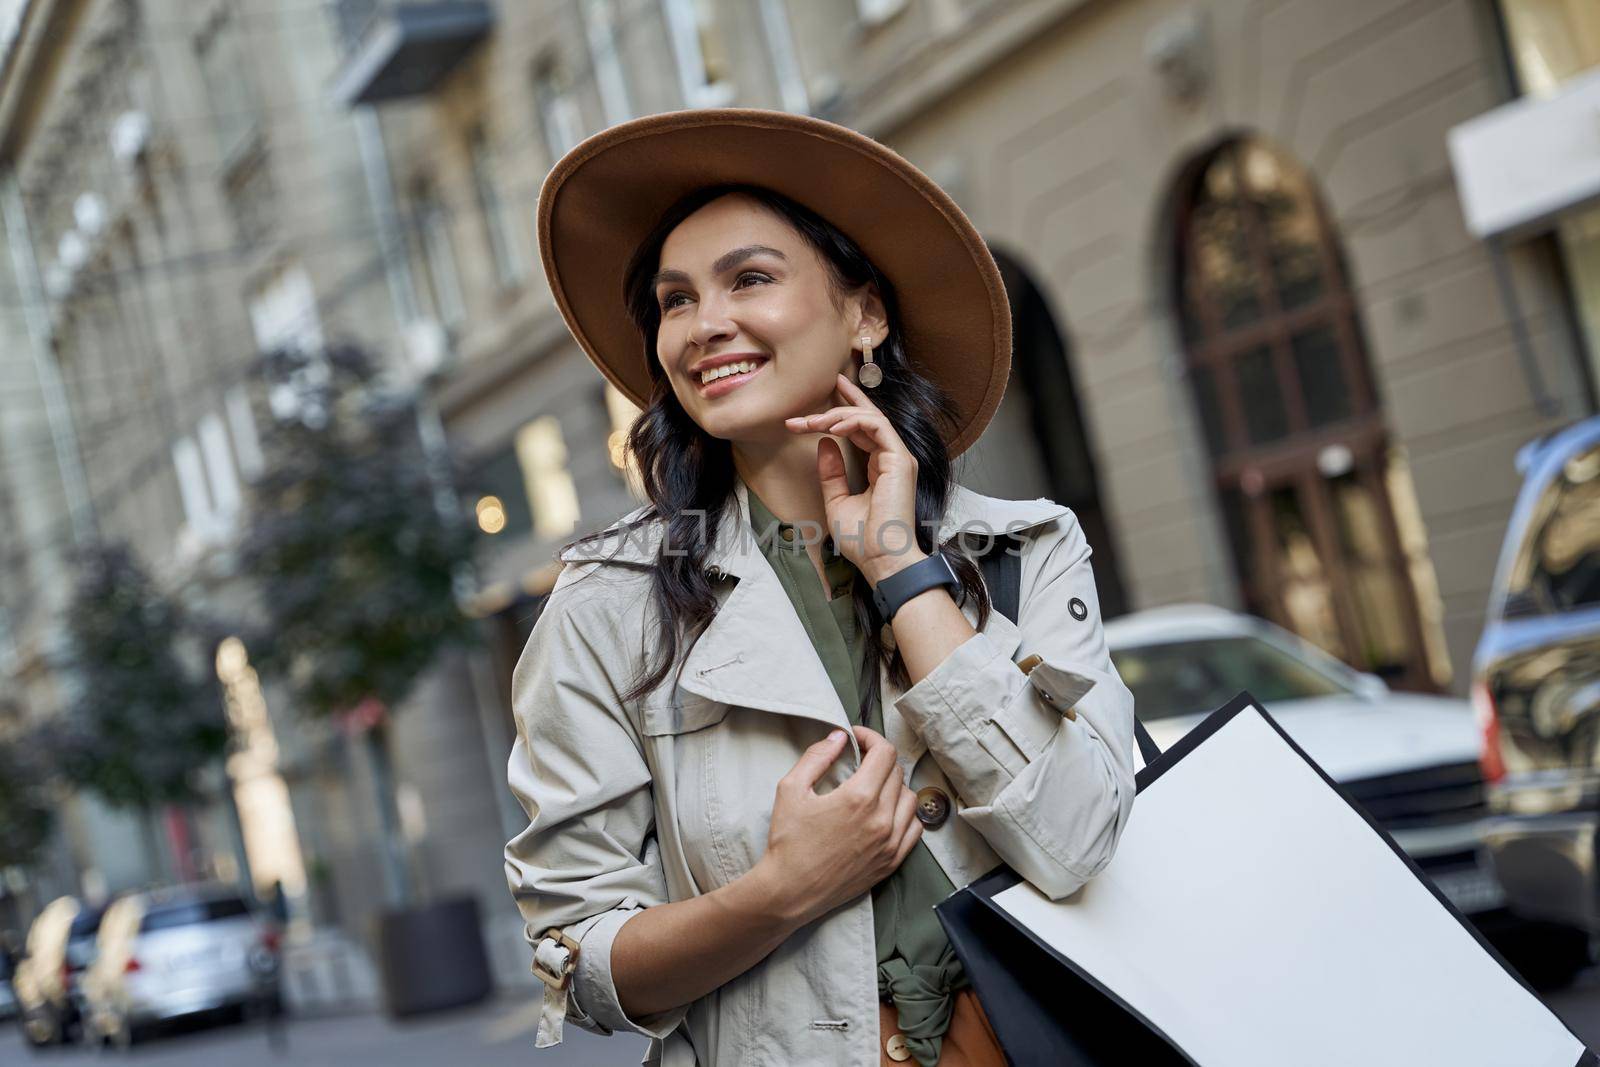 Fashion girl. Portrait of a young beautiful stylish woman in hat with shopping bag looking aside and smiling while standing on the city street. Fashion, people lifestyle, shopping